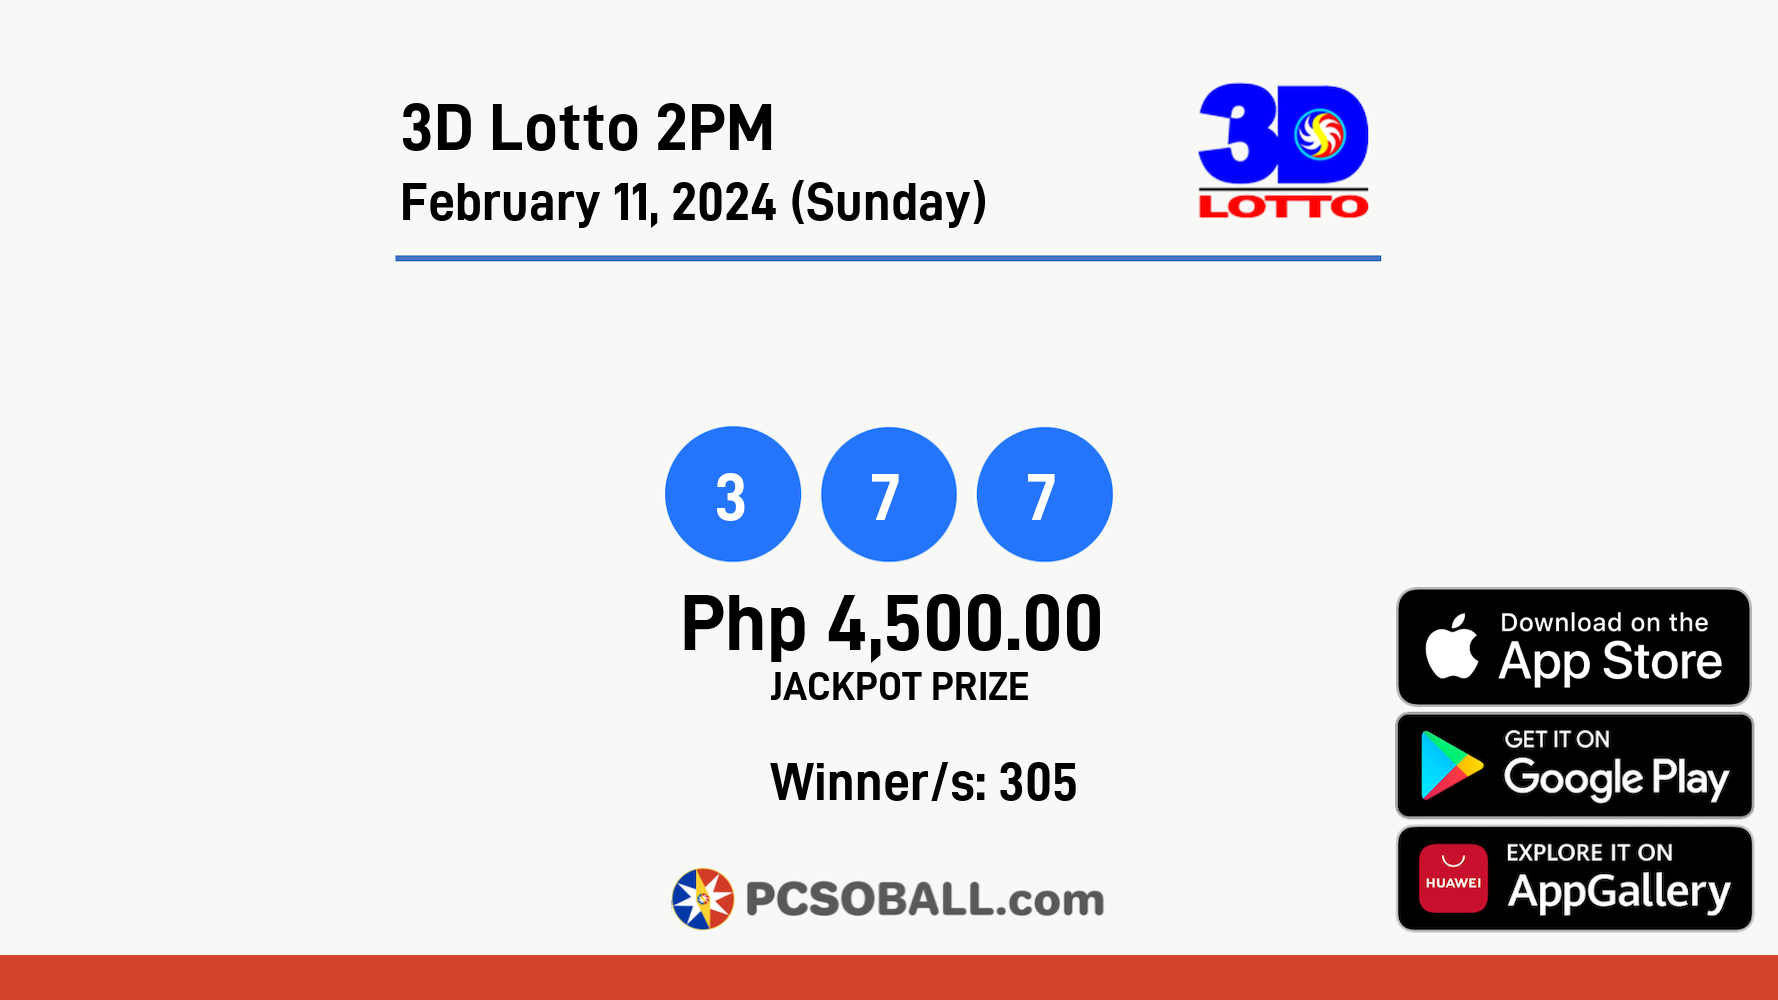 3D Lotto 2PM February 11, 2024 (Sunday) Result